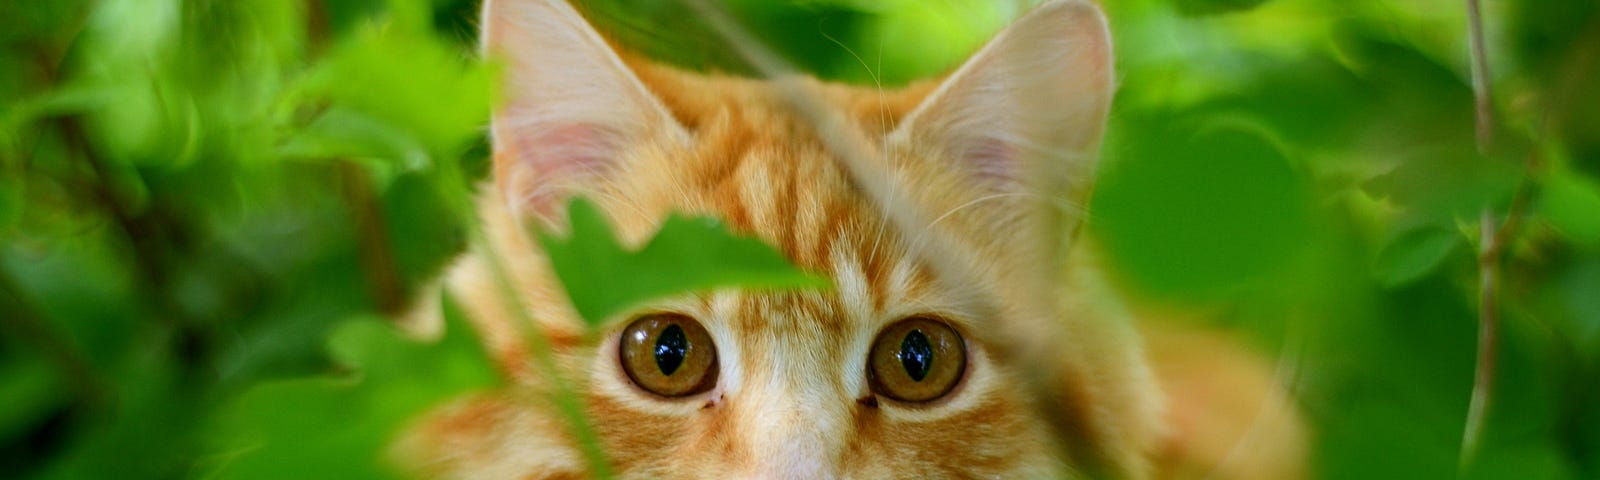 A cute orange cat stares out shyly from behind leaves.